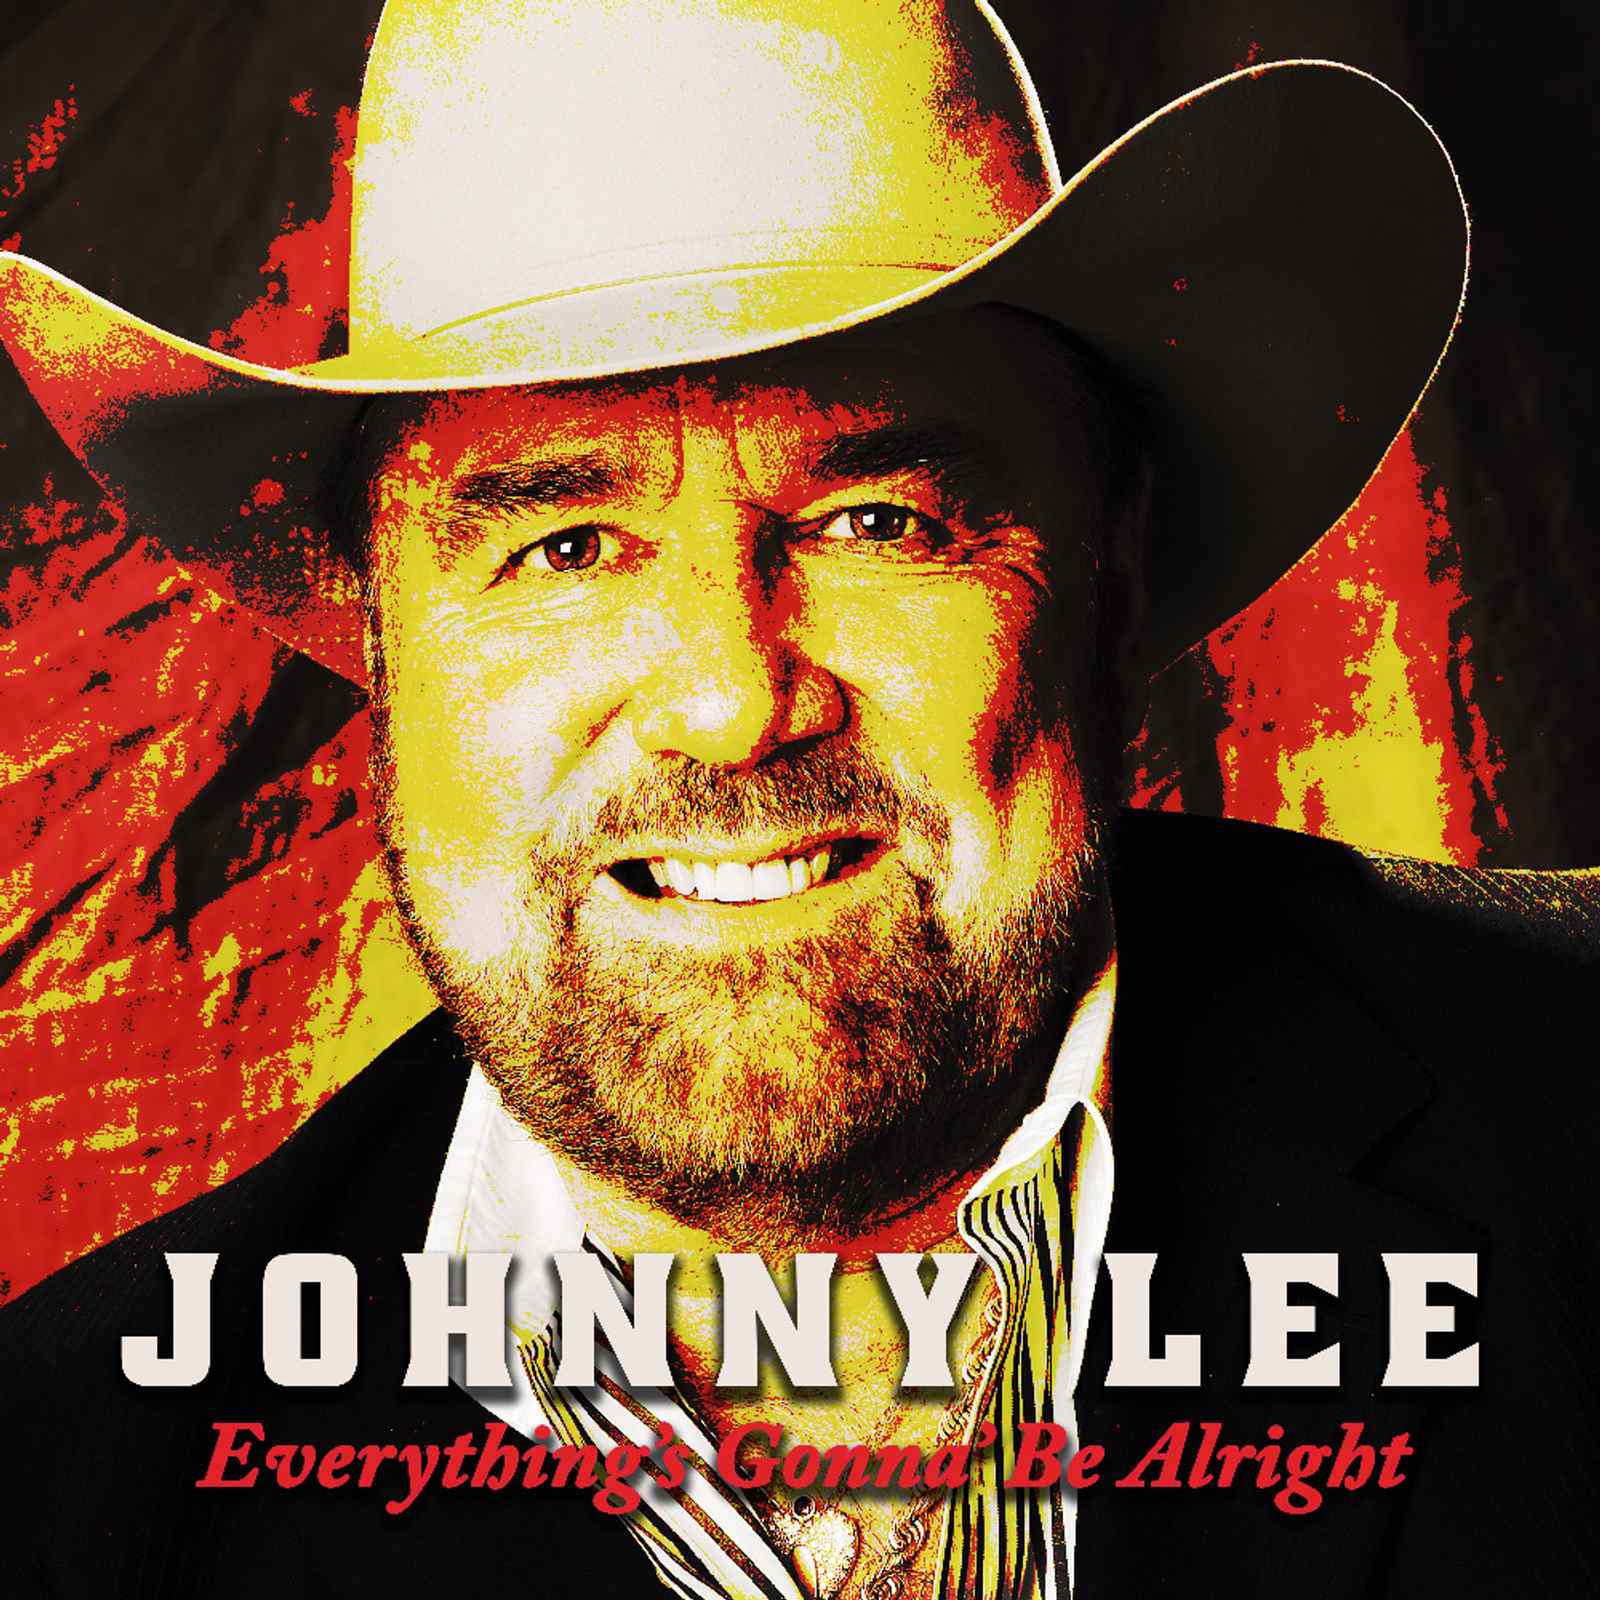 Everything's Gonna' Be Alright by Johnny Lee